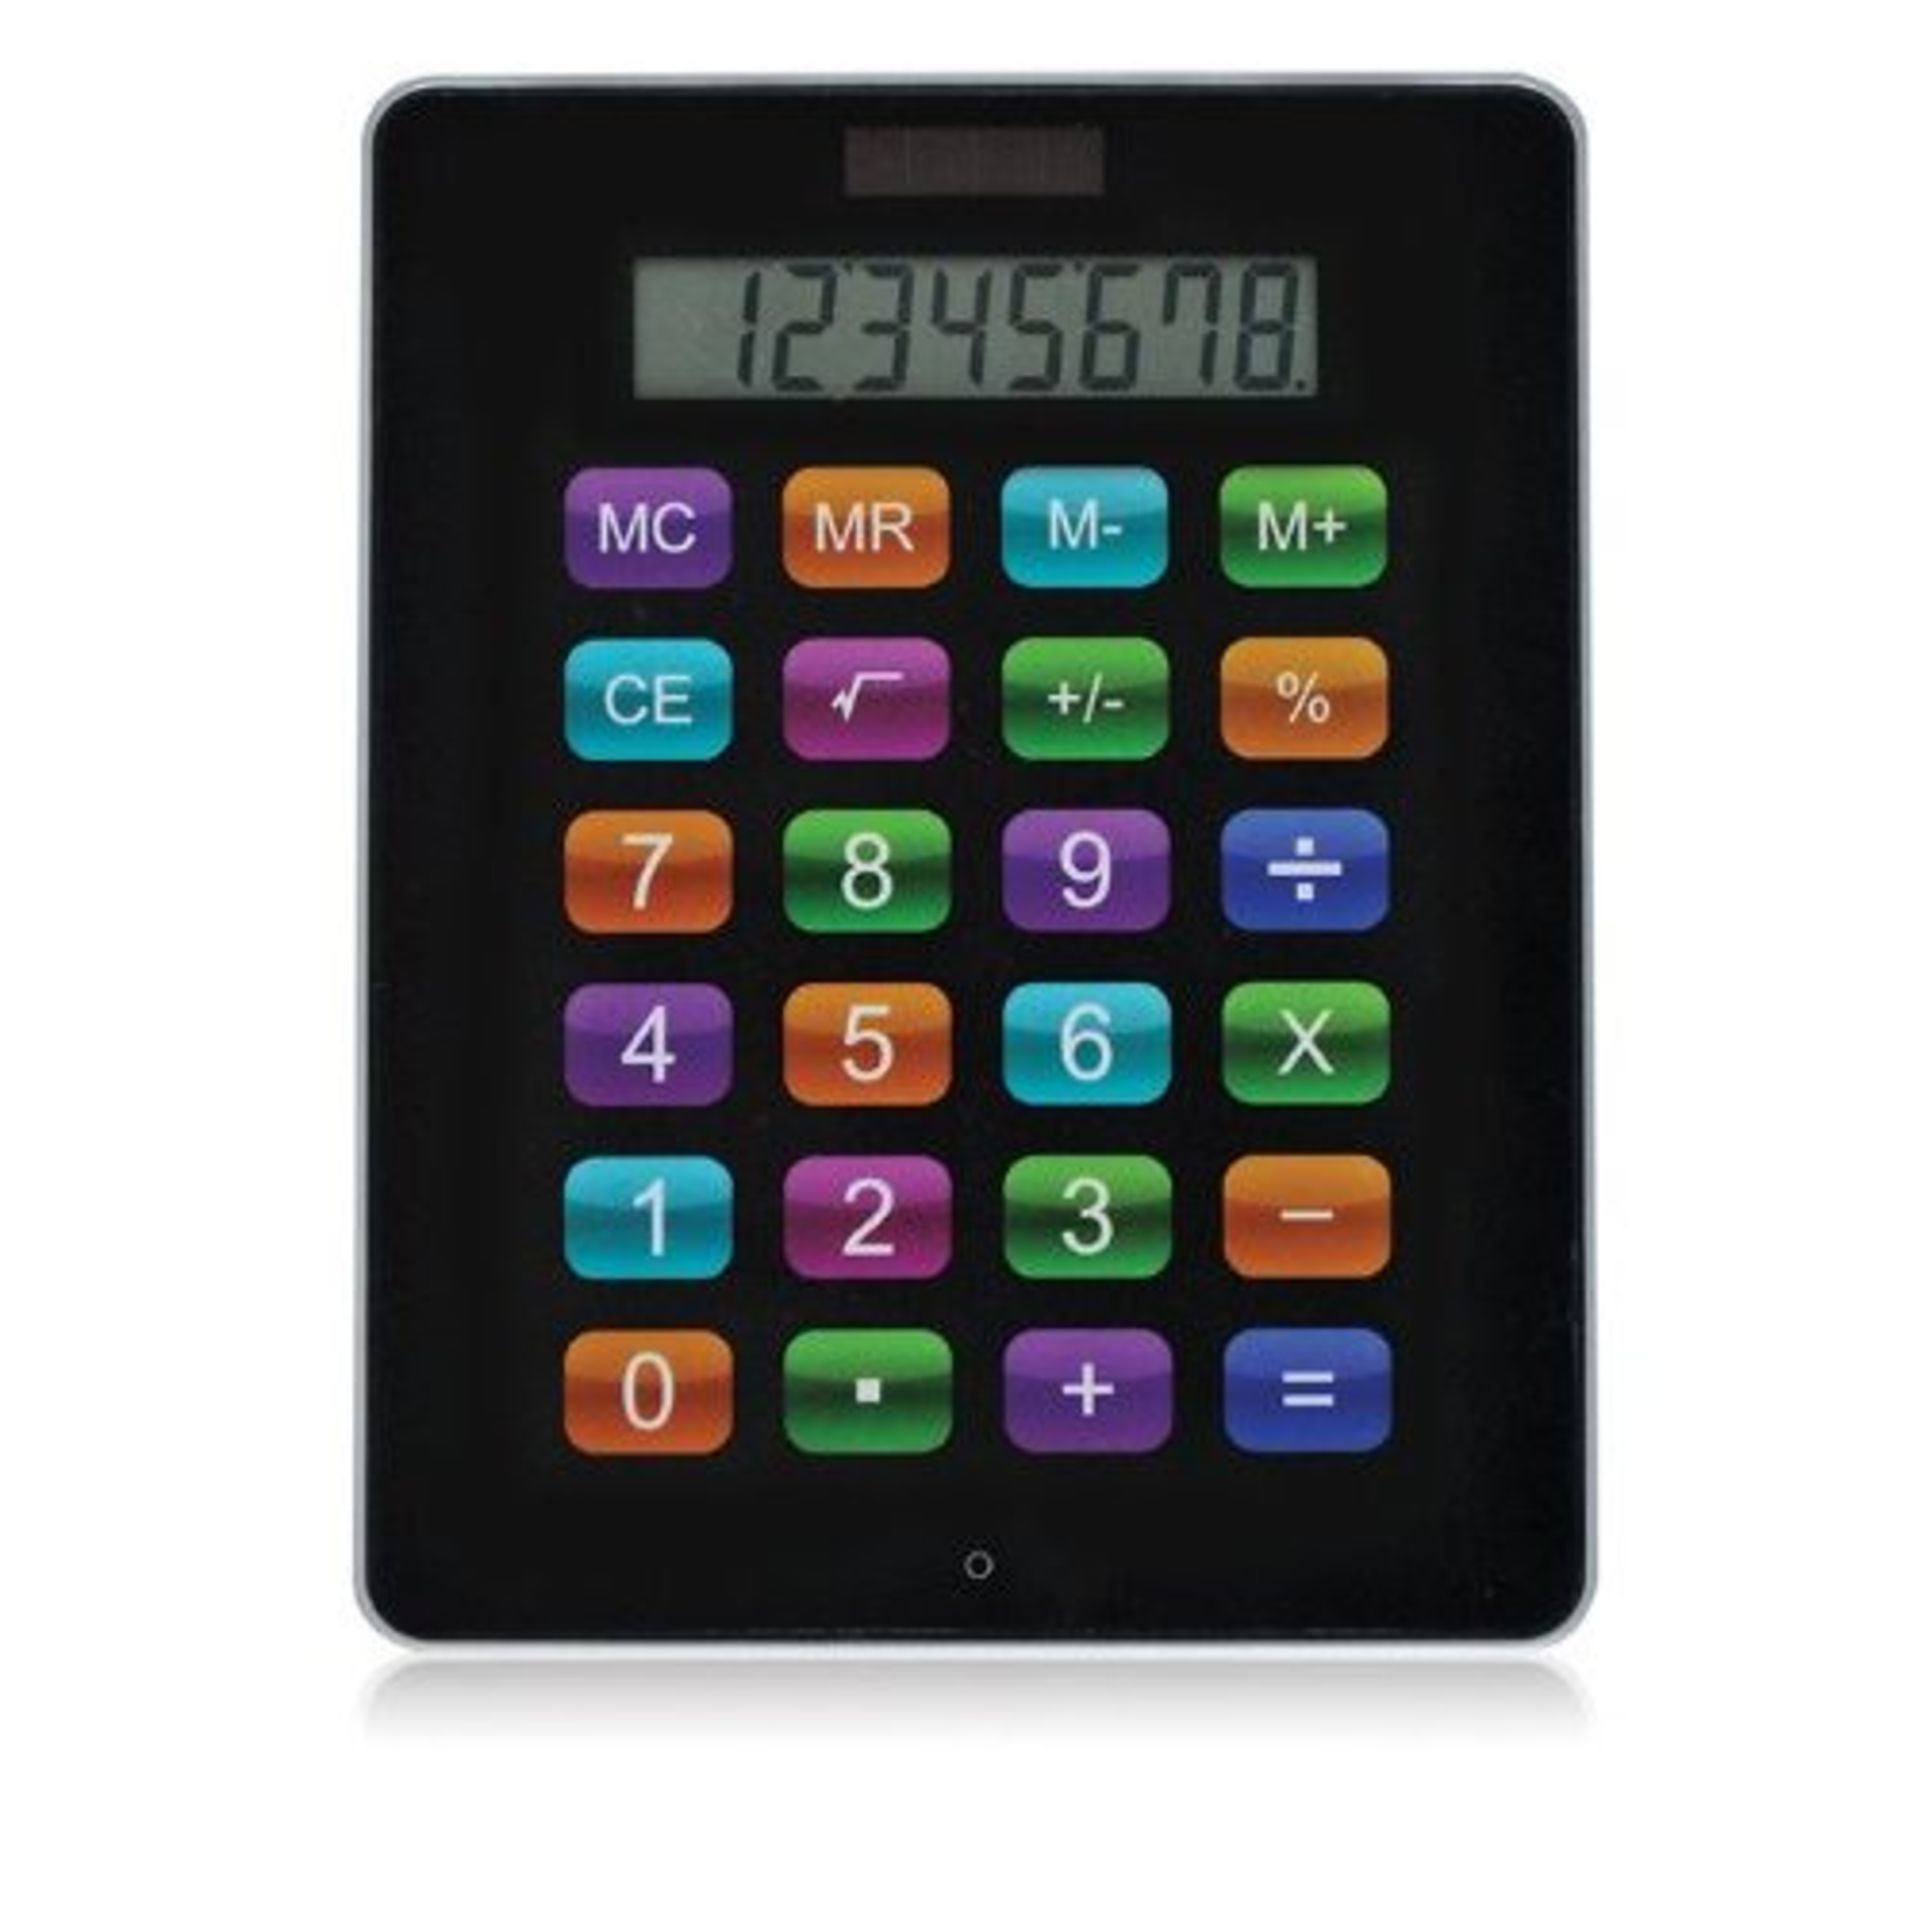 V *TRADE QTY* Brand New Ipad Calculator-Battery powered with solar backup X 5 YOUR BID PRICE TO BE